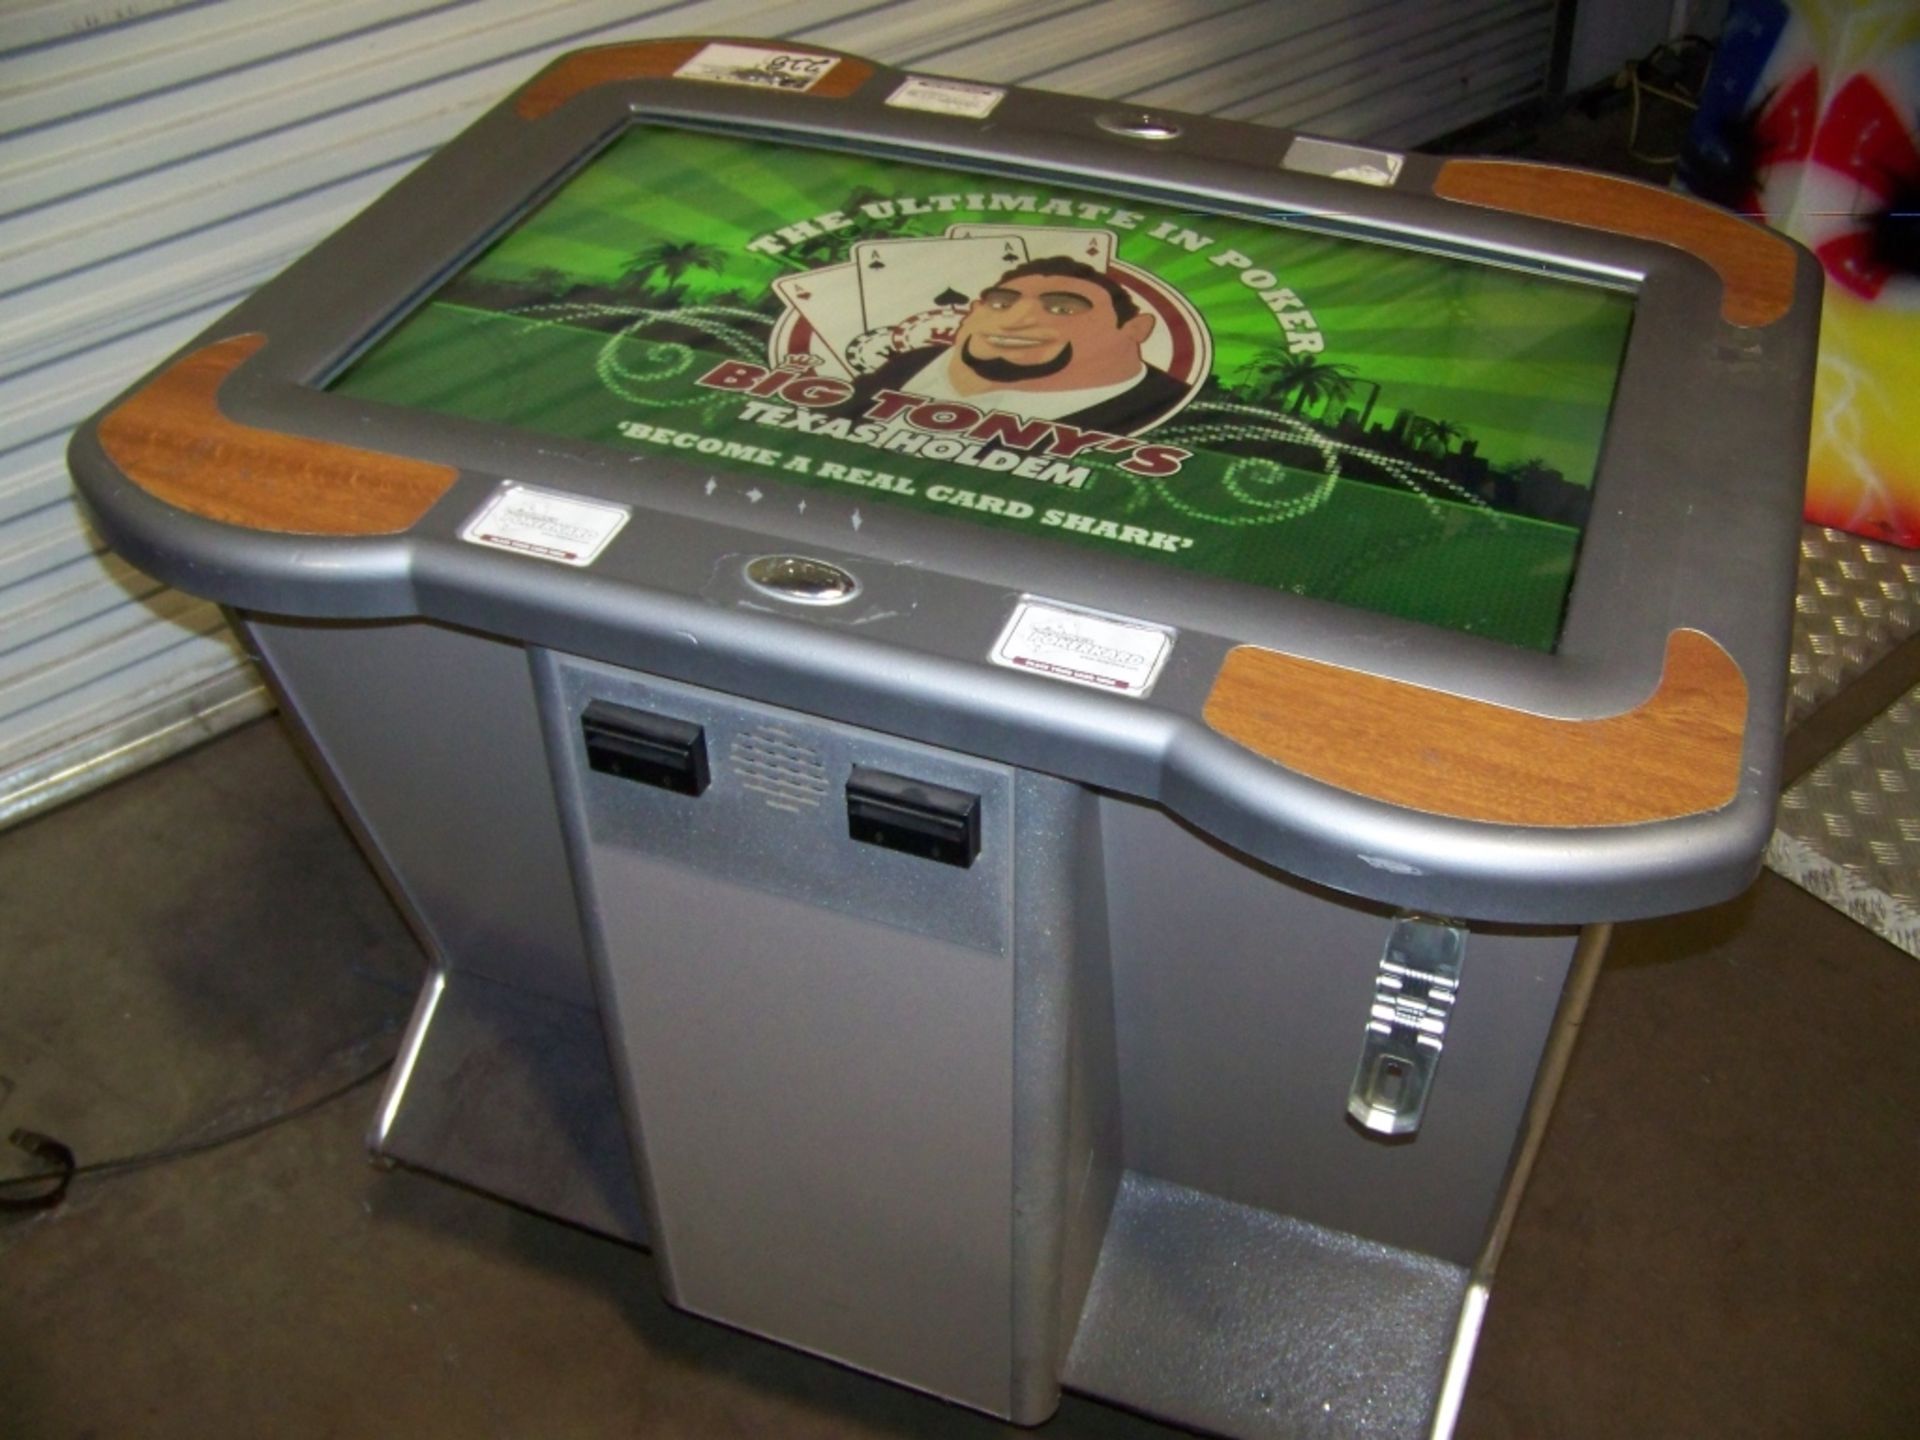 BIG TONY TEXAS HOLD'EM POKER ARCADE GAME Item is in used condition. Evidence of wear and